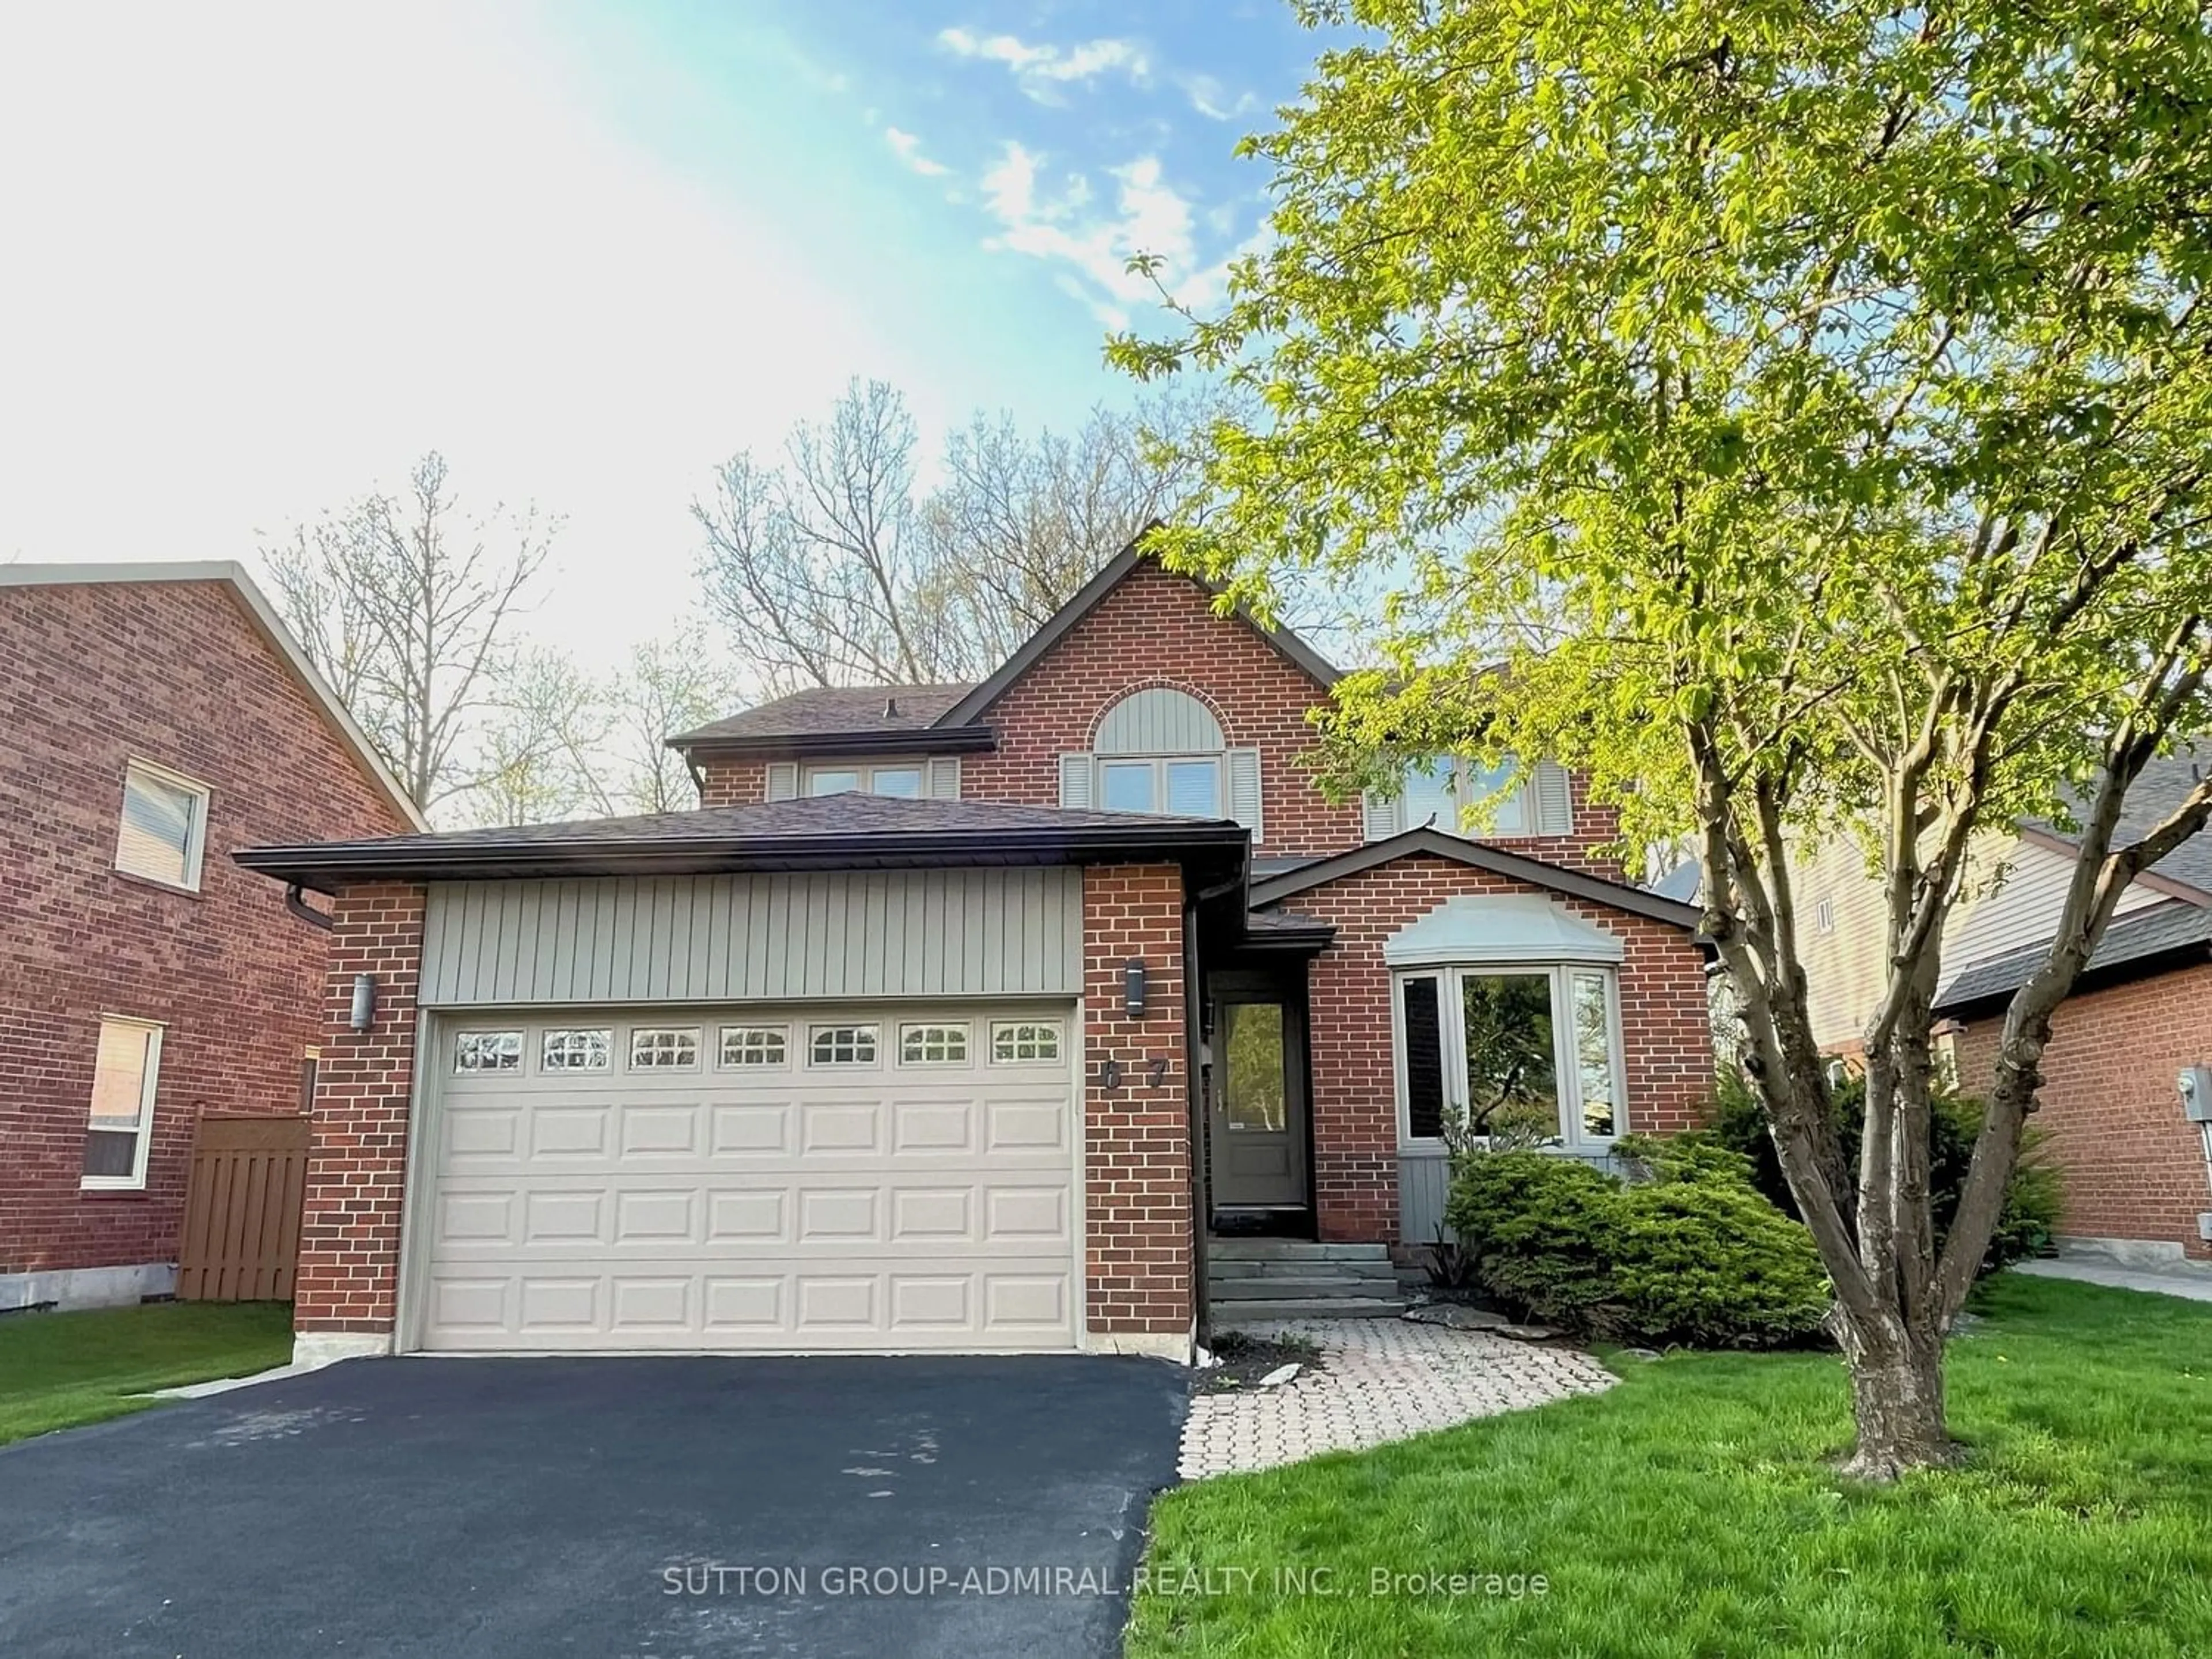 Home with brick exterior material for 67 Torrance Woods, Brampton Ontario L6Y 2X4